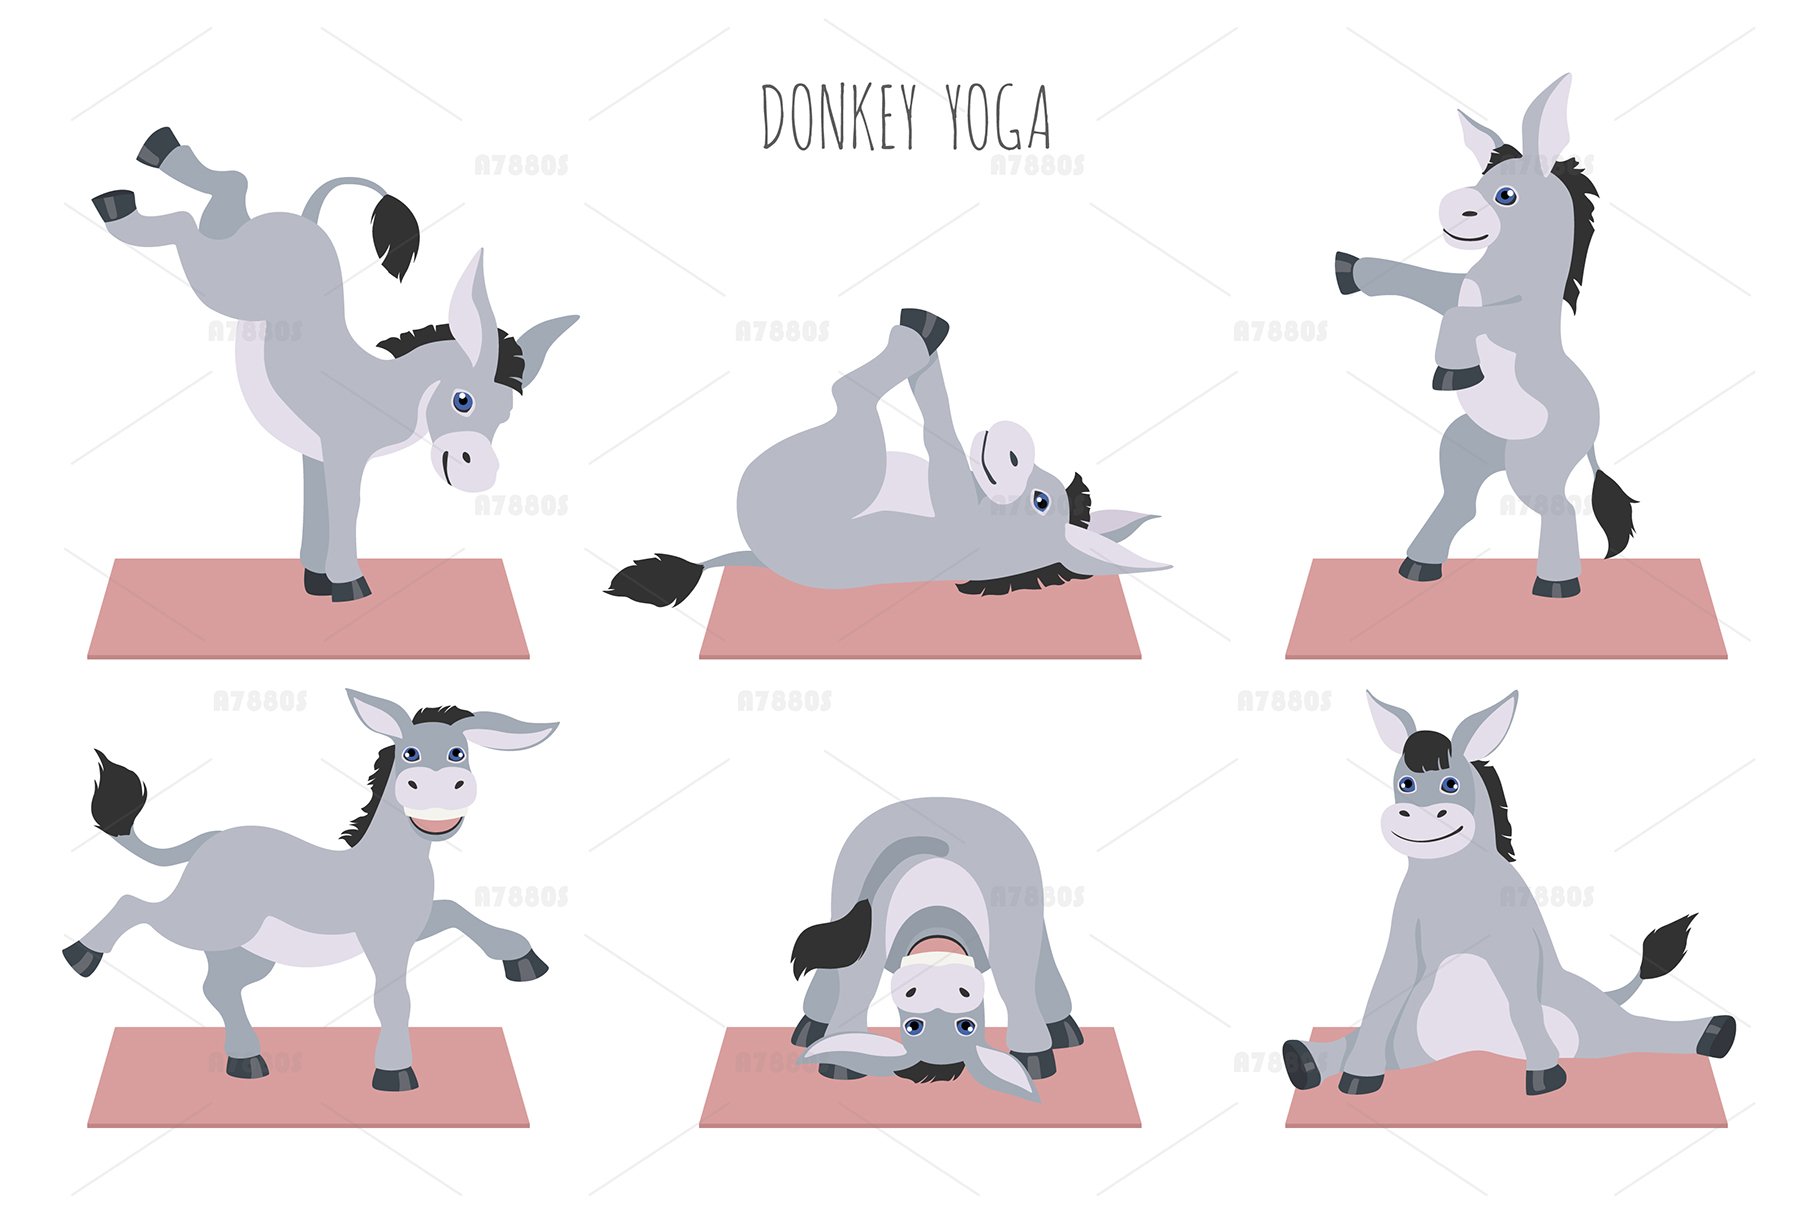 Donkey is having a yoga time.